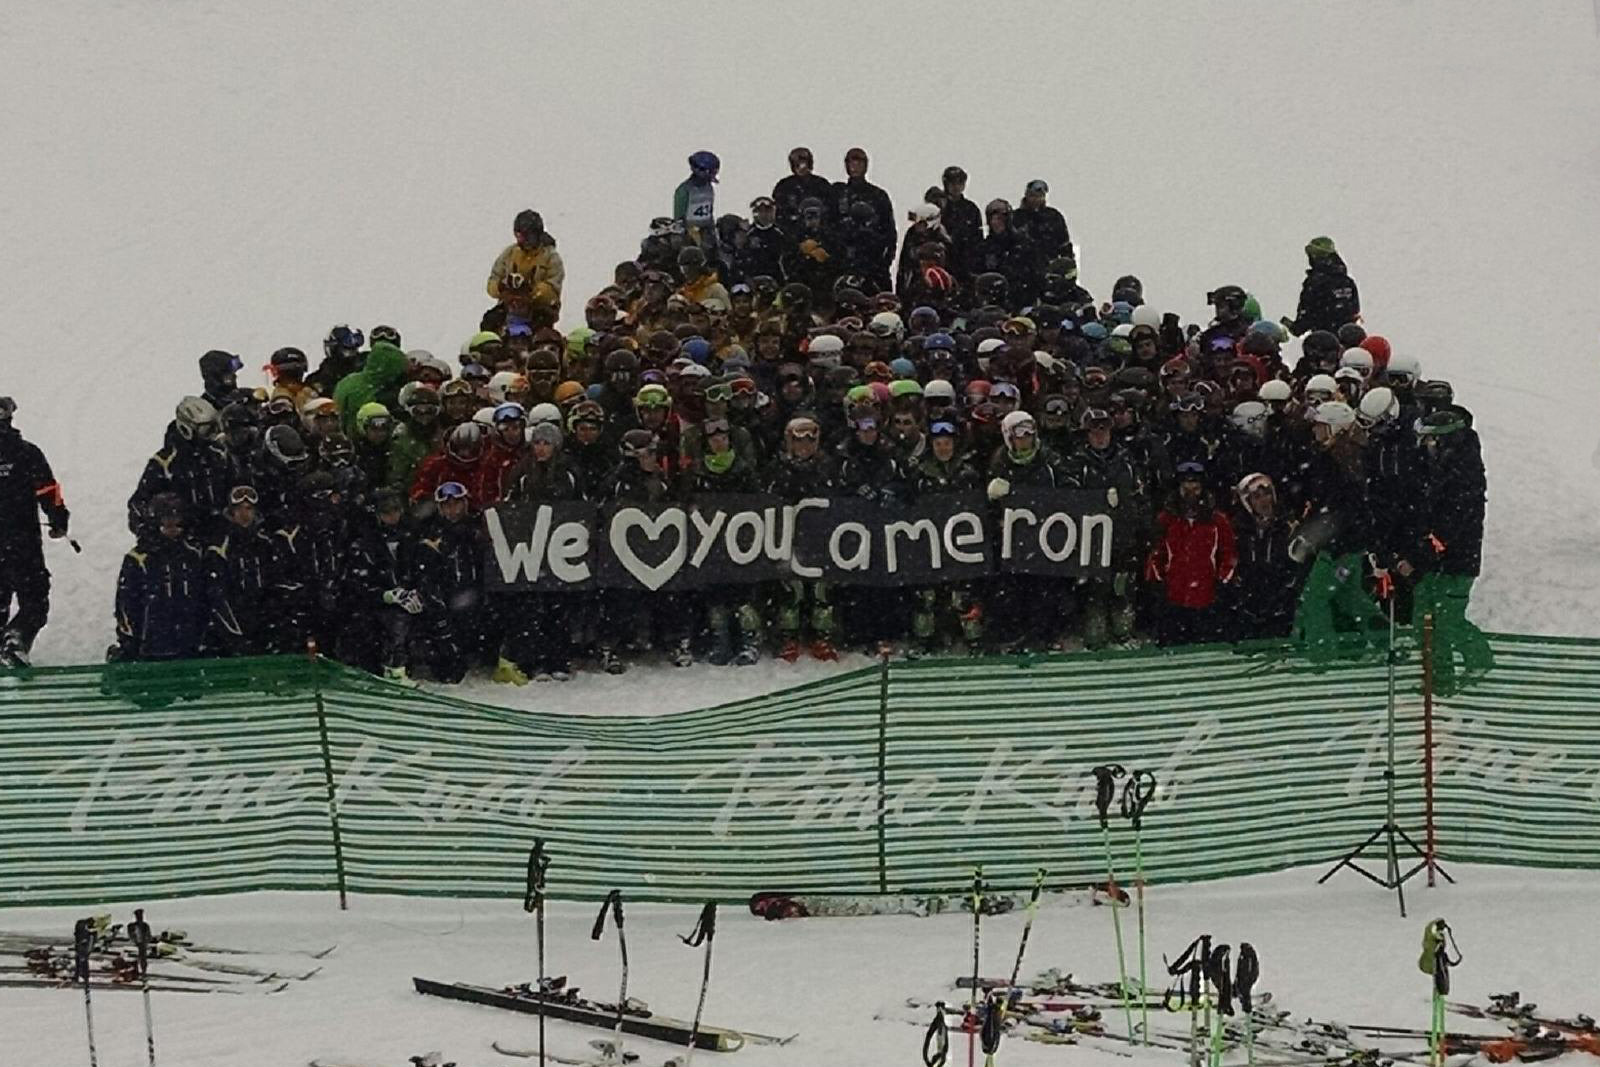 Cameron's ski club showing support